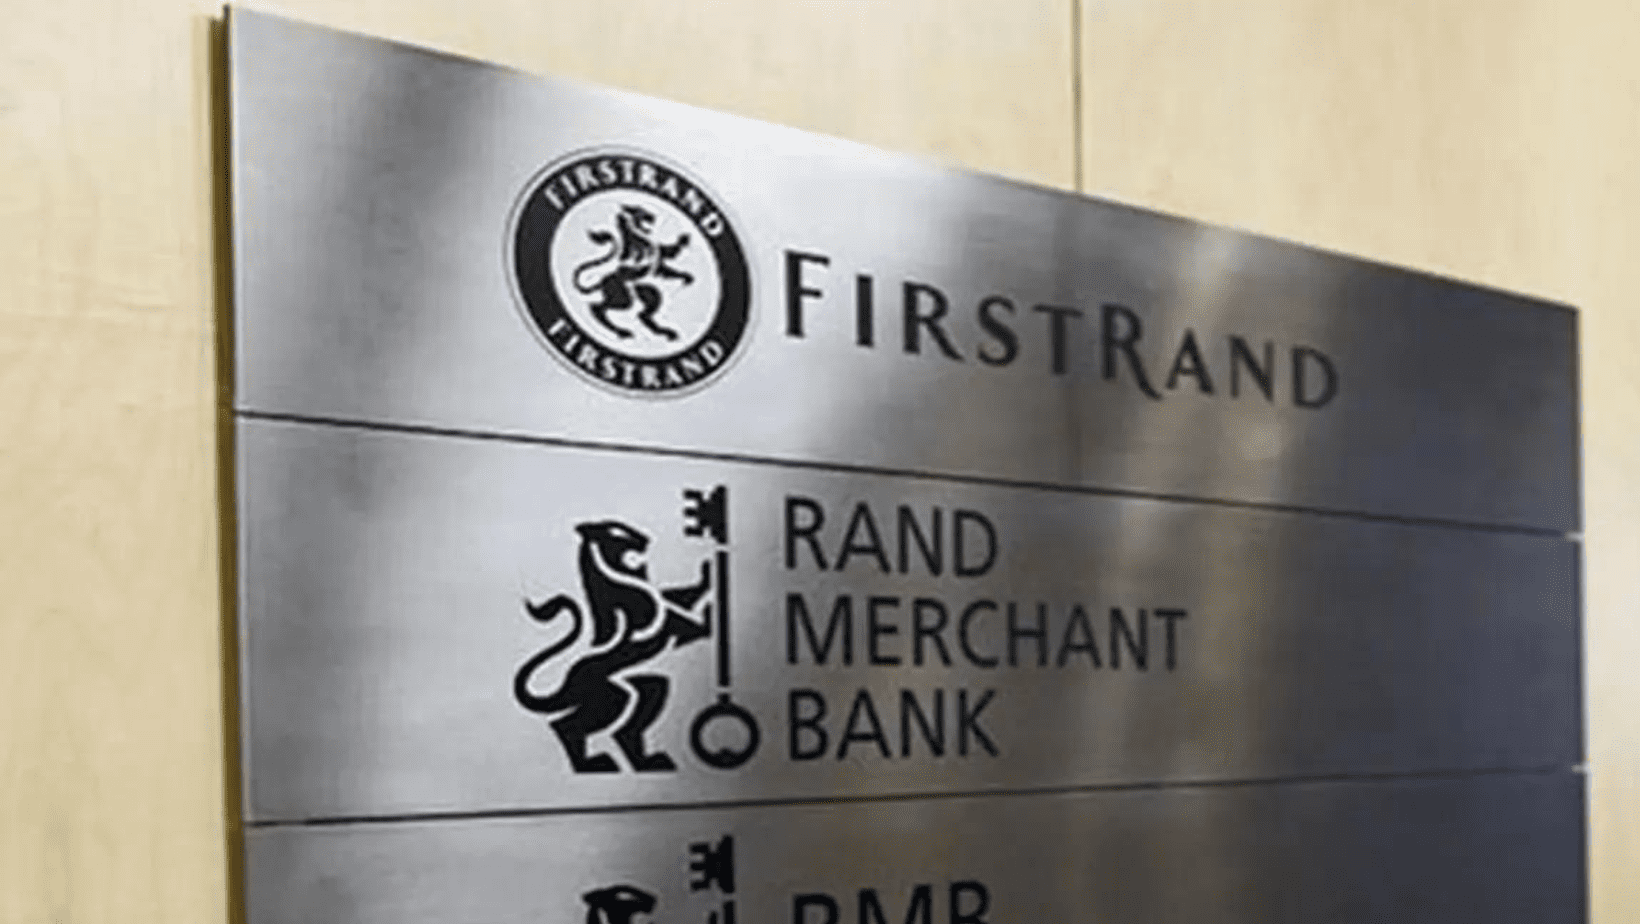 FirstRand’s Resounding Victory: 27th AGM Triumphs with Unanimous Shareholder Backing, Key Appointments, and Board Dynamics Shift